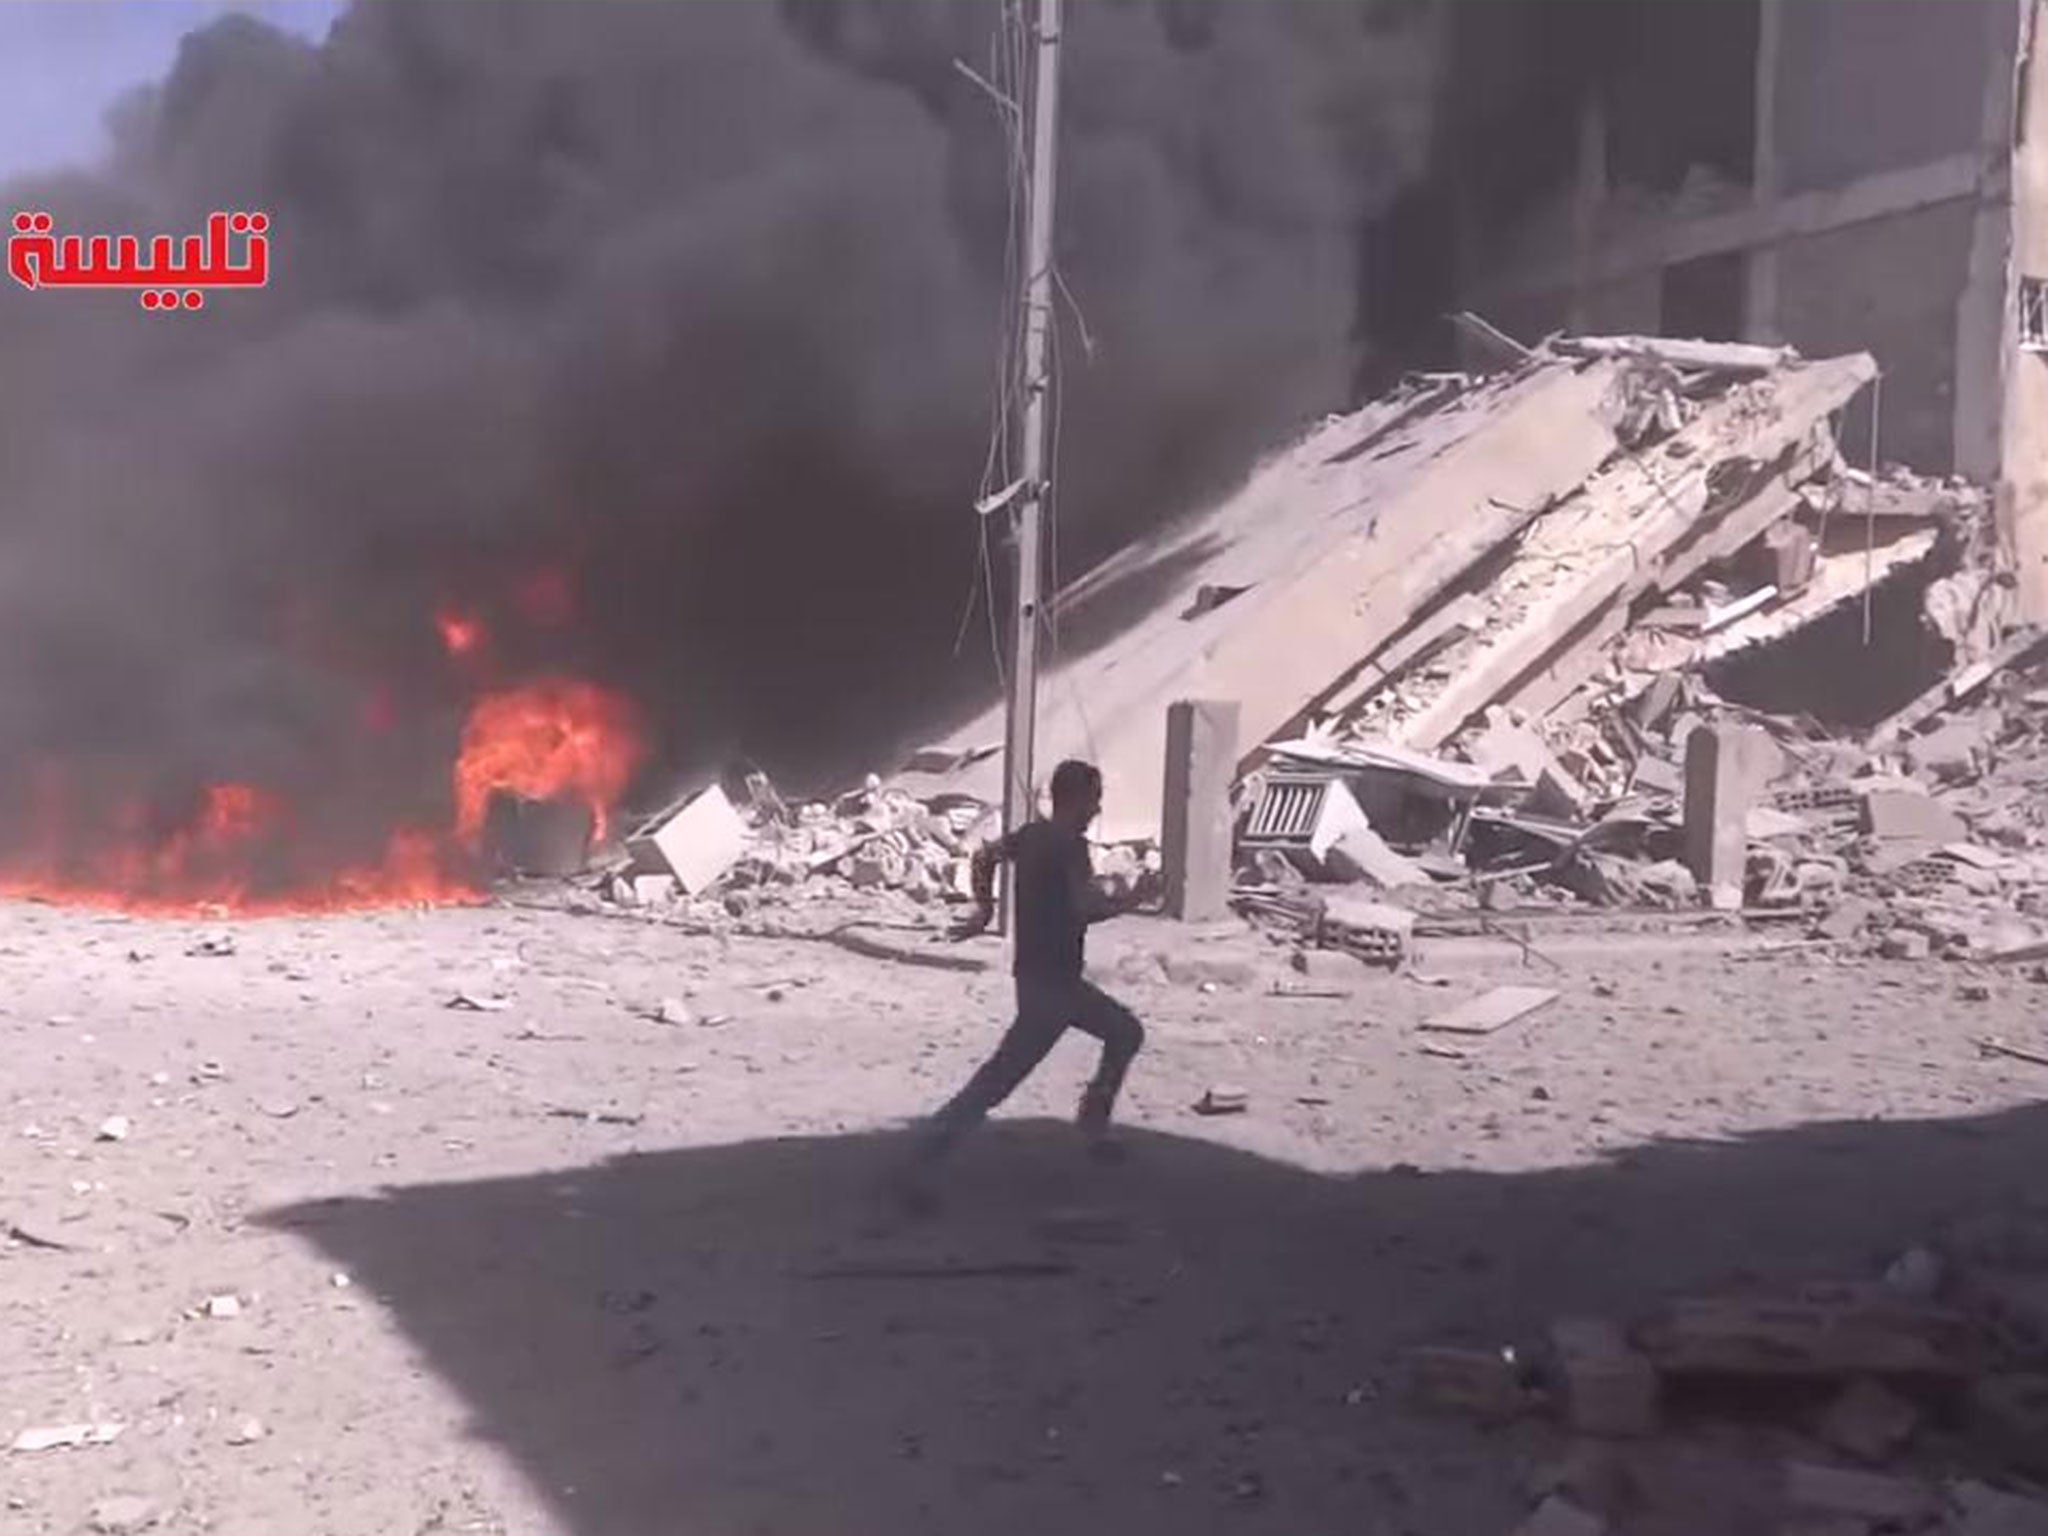 A screengrab of footage claiming to show the aftermath of air strikes by a Russian plane in Tabliseh, Syria, on 30 September 2015